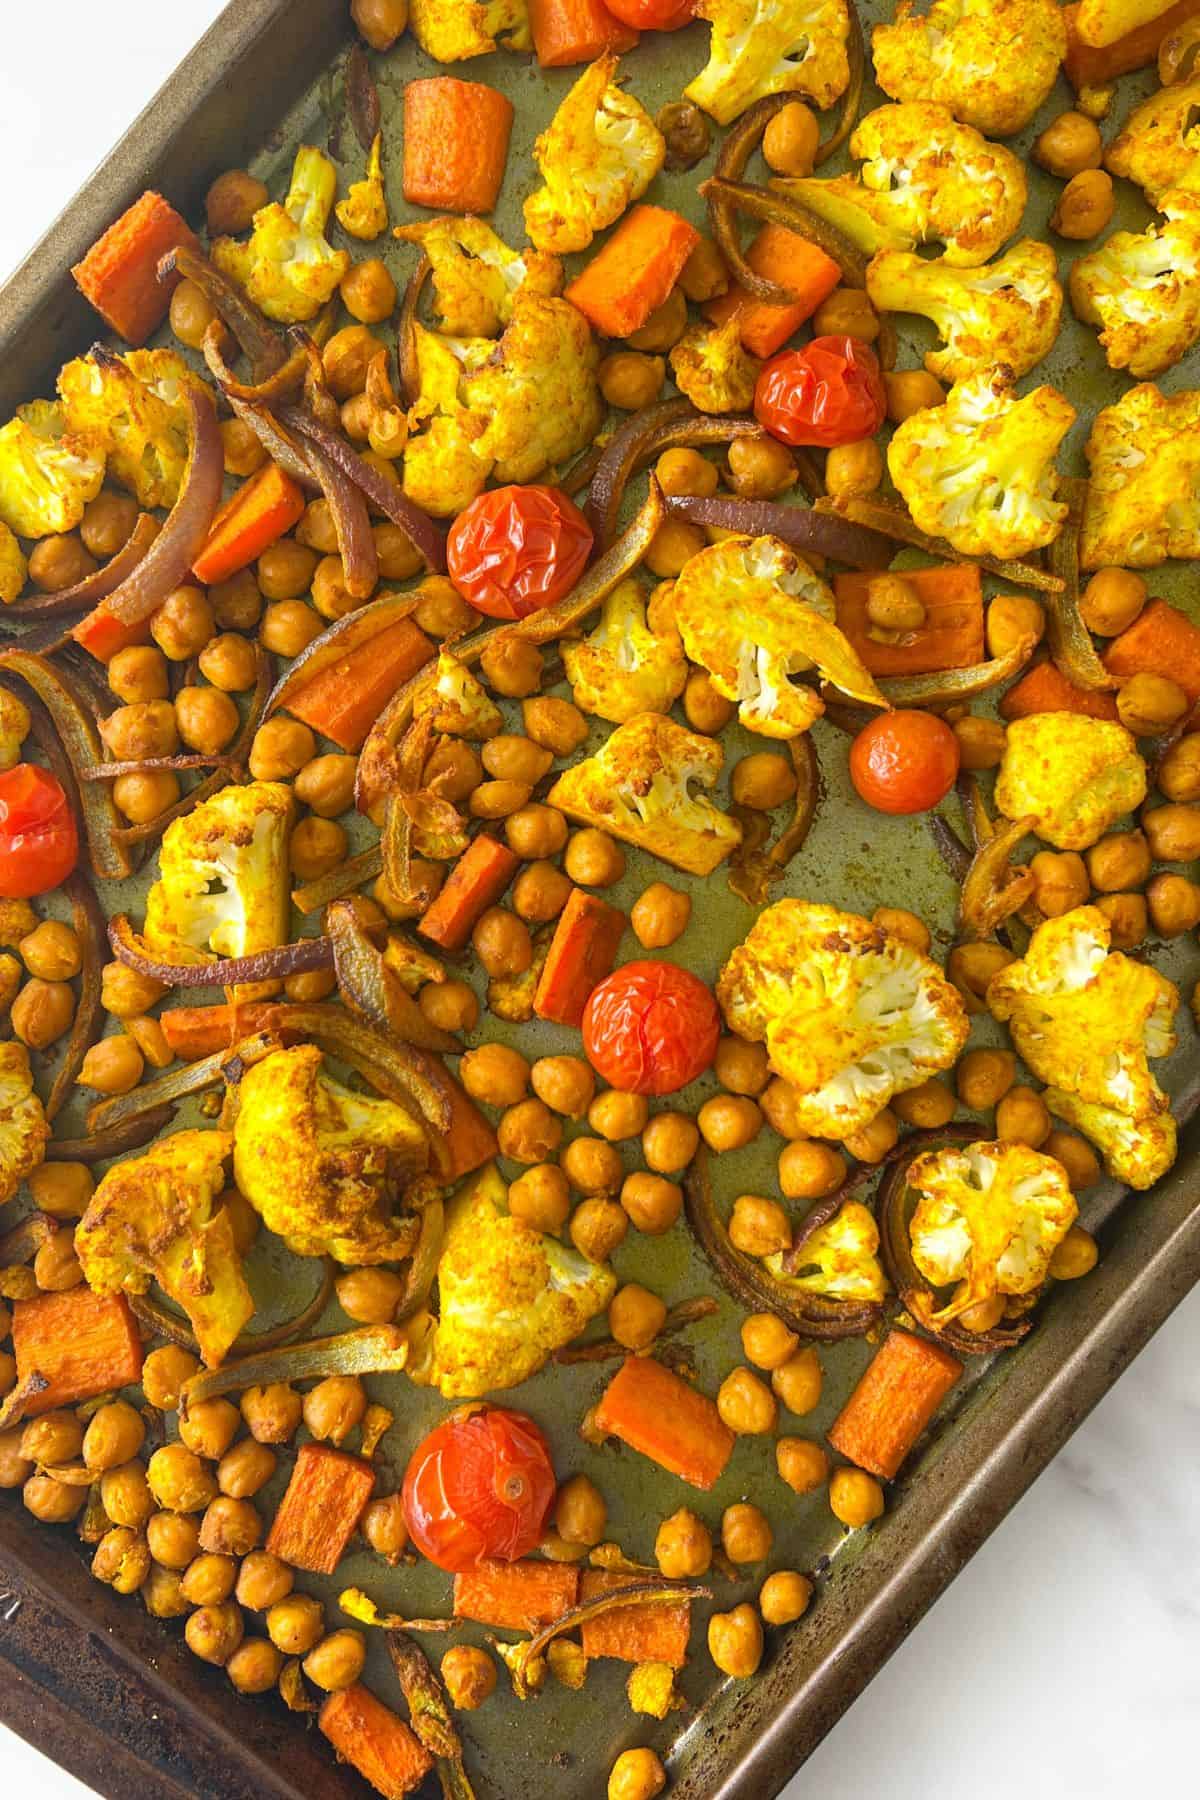 Roasted Vegetables on a Tray to make Healthy Couscous Moroccan Salad.